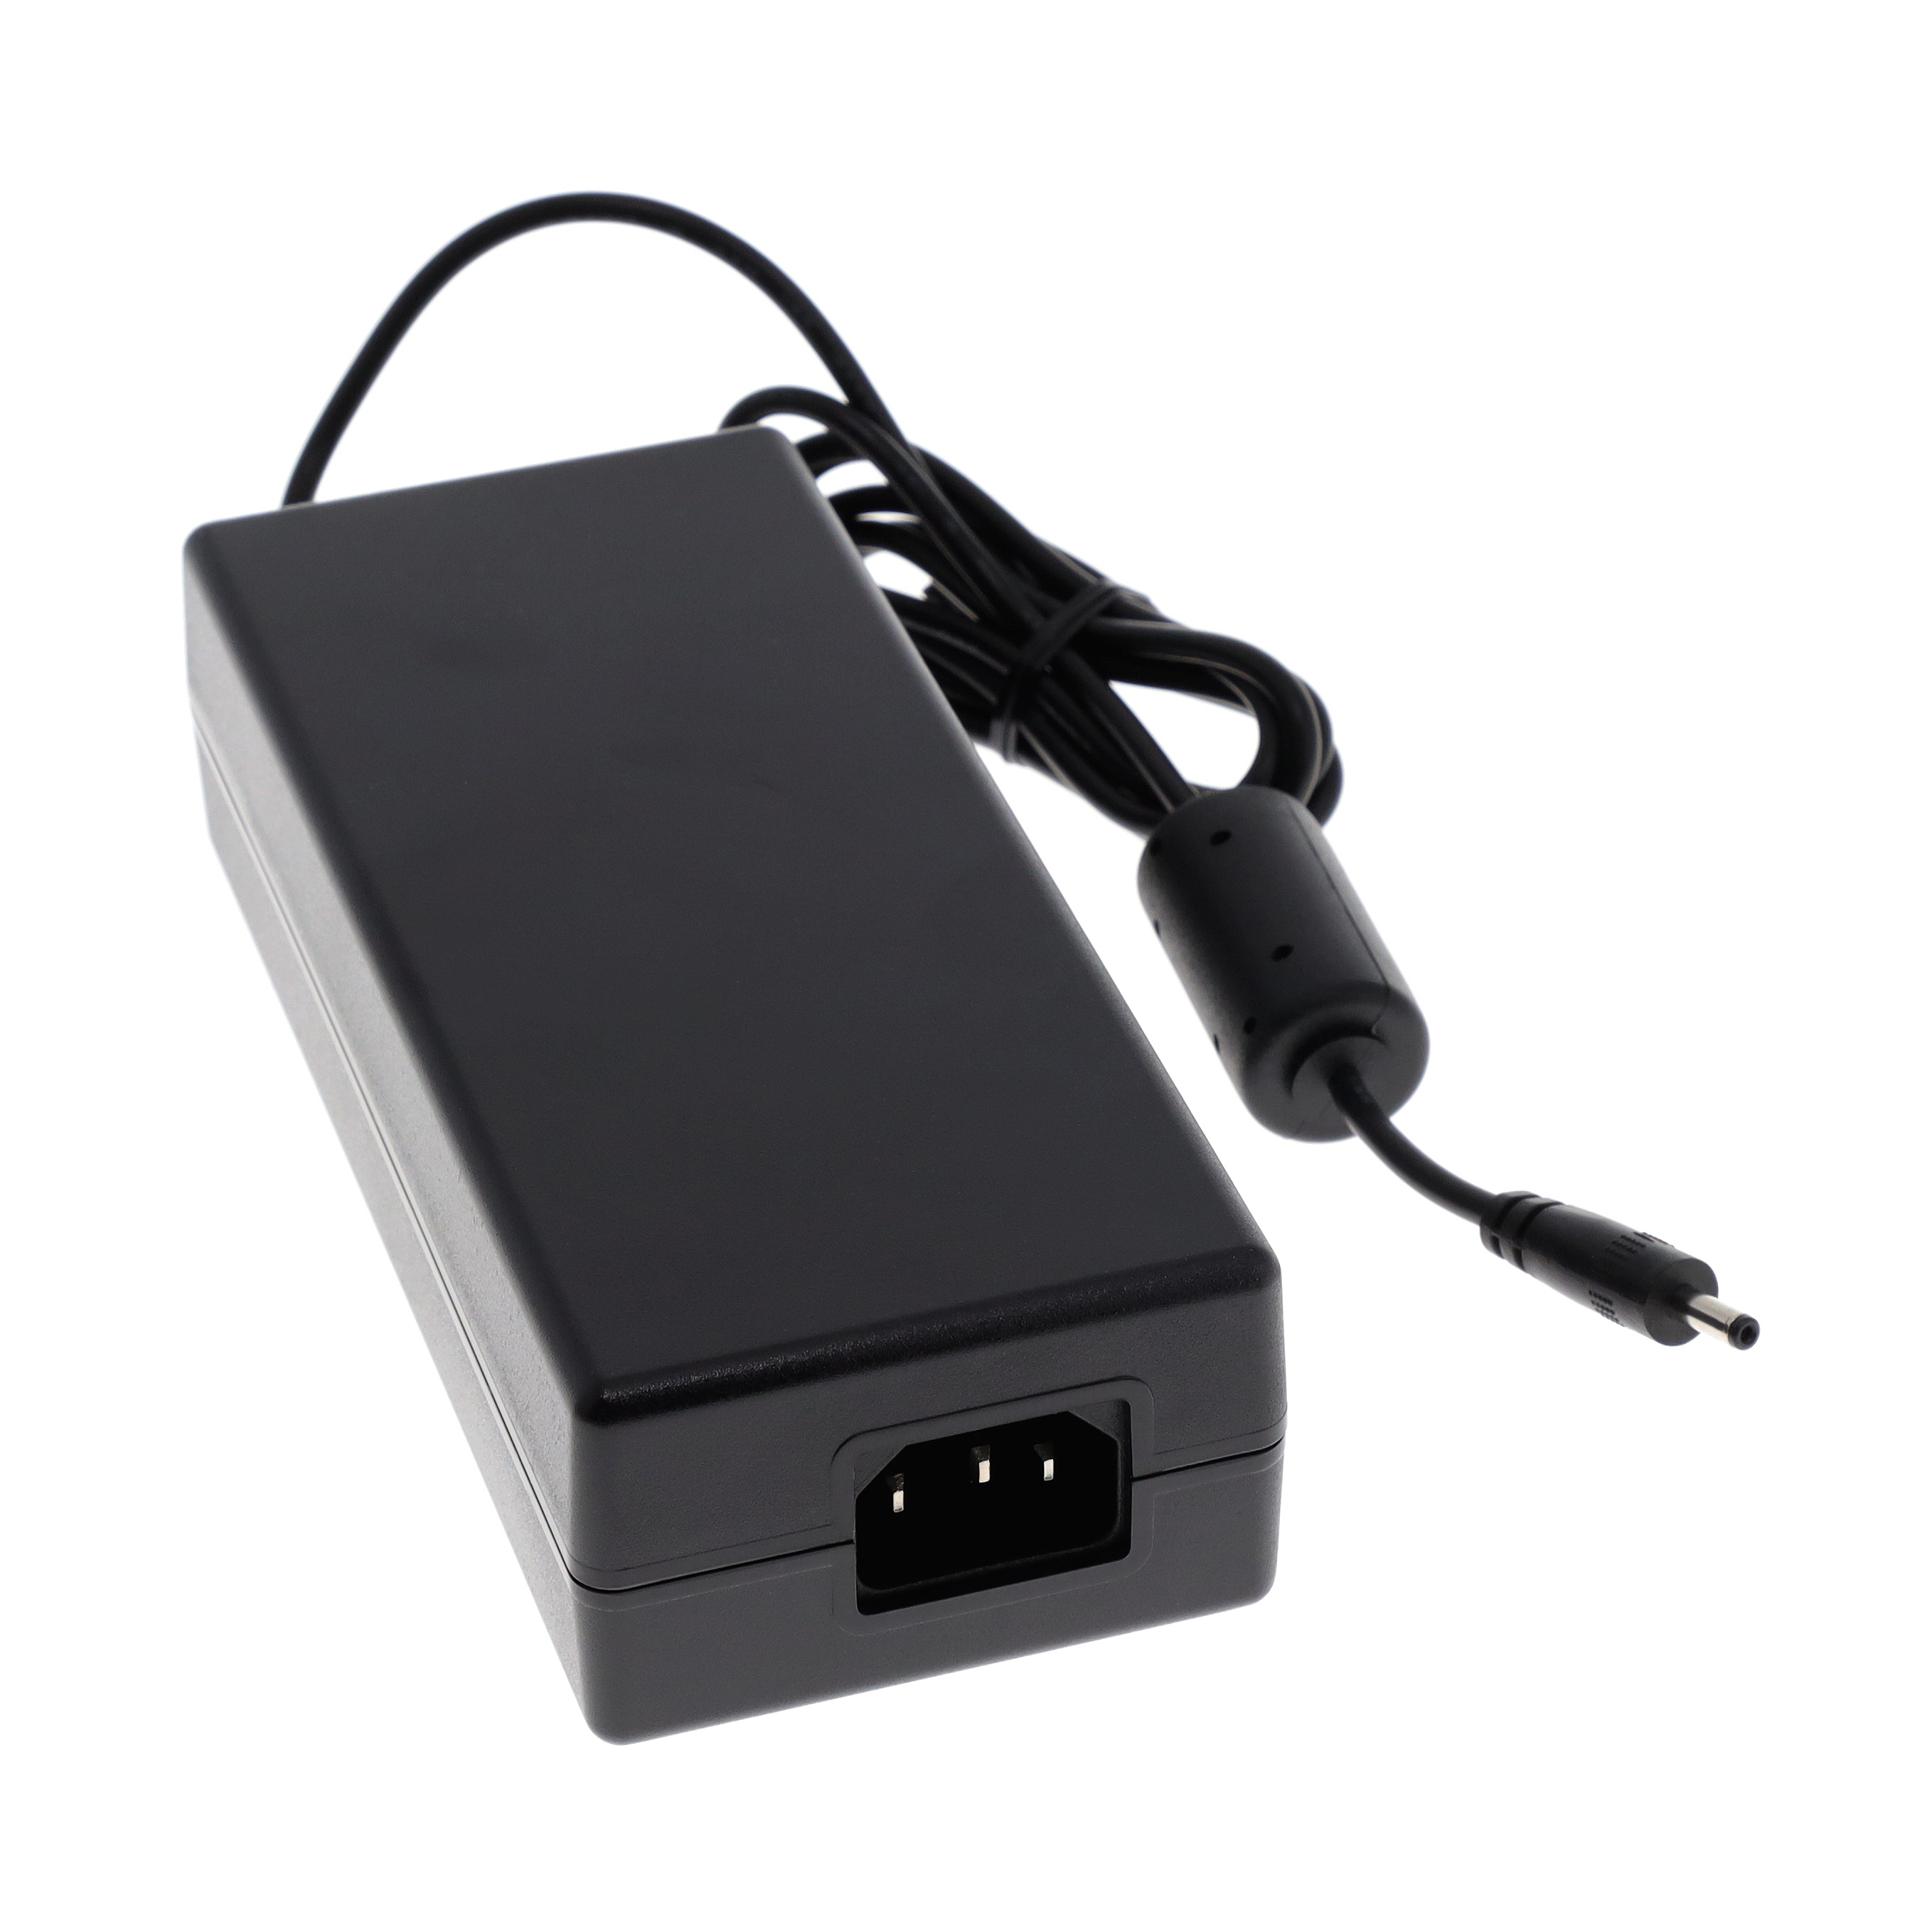 Networking Power Adapter For use with